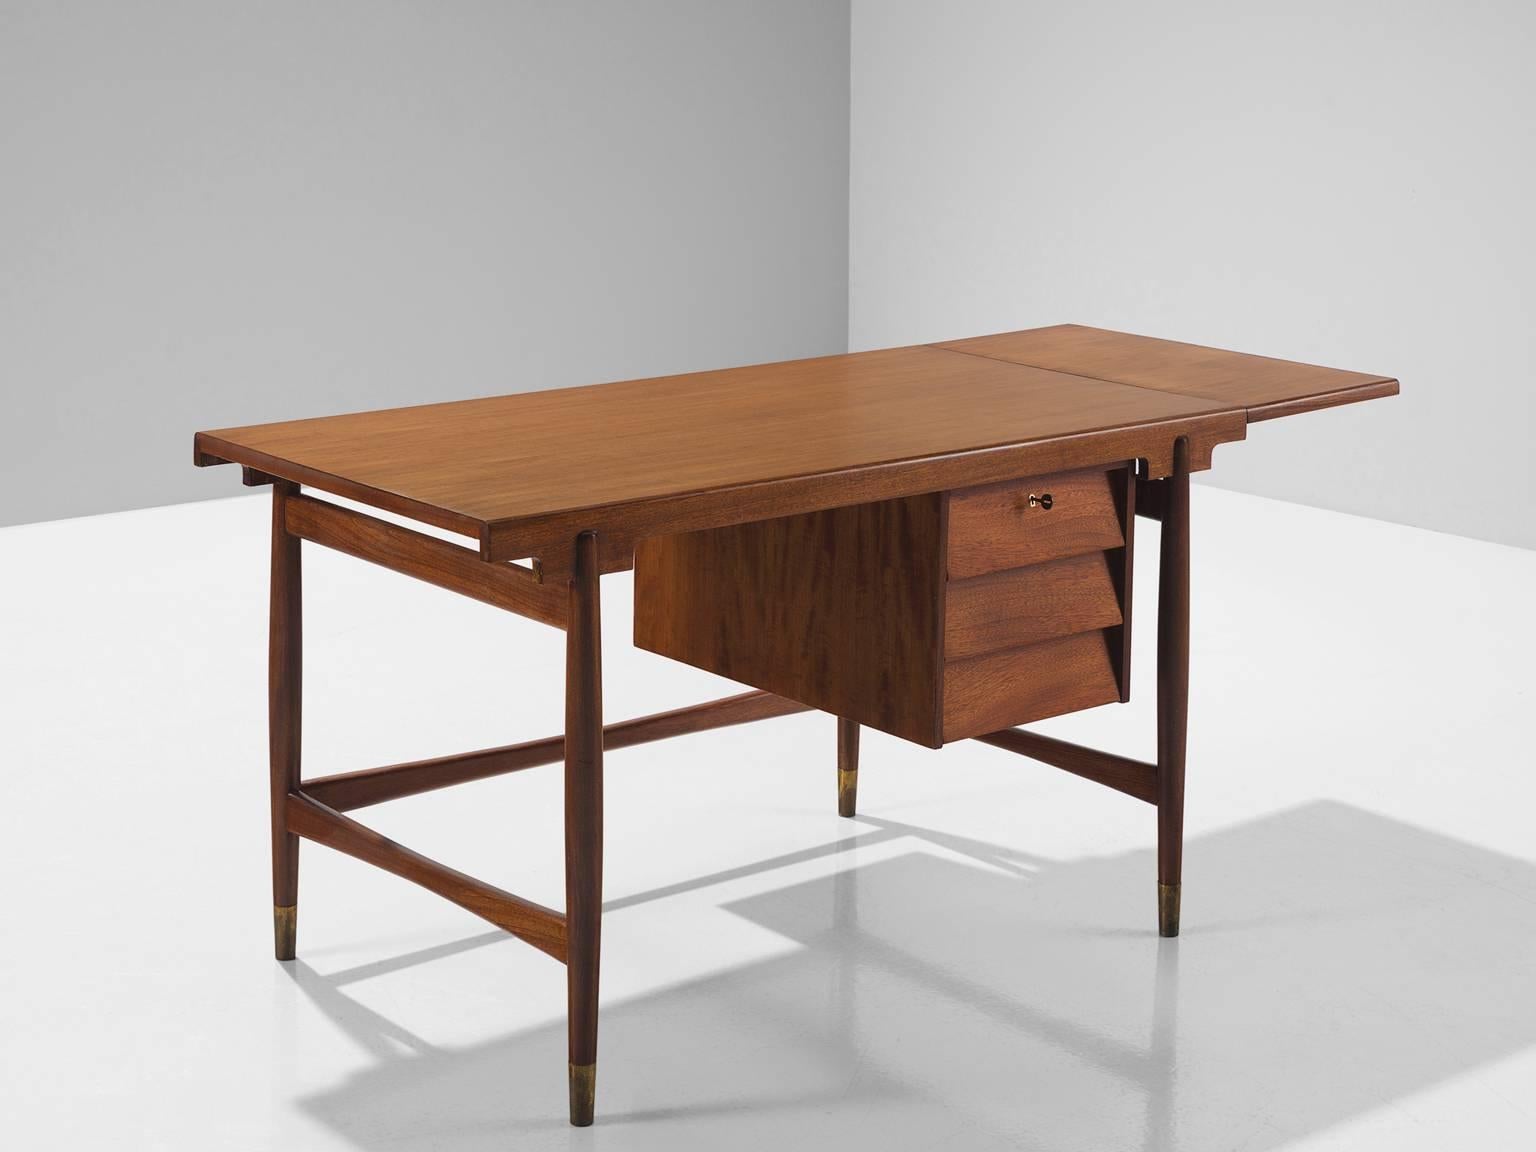 Desk or writing table, teak and brass, Scandinavia, 1950s

This sculptural freestanding desk is executed in teak and sled bases and contains one section with three drawers on the right sides which can be locked with a brass key that is included.